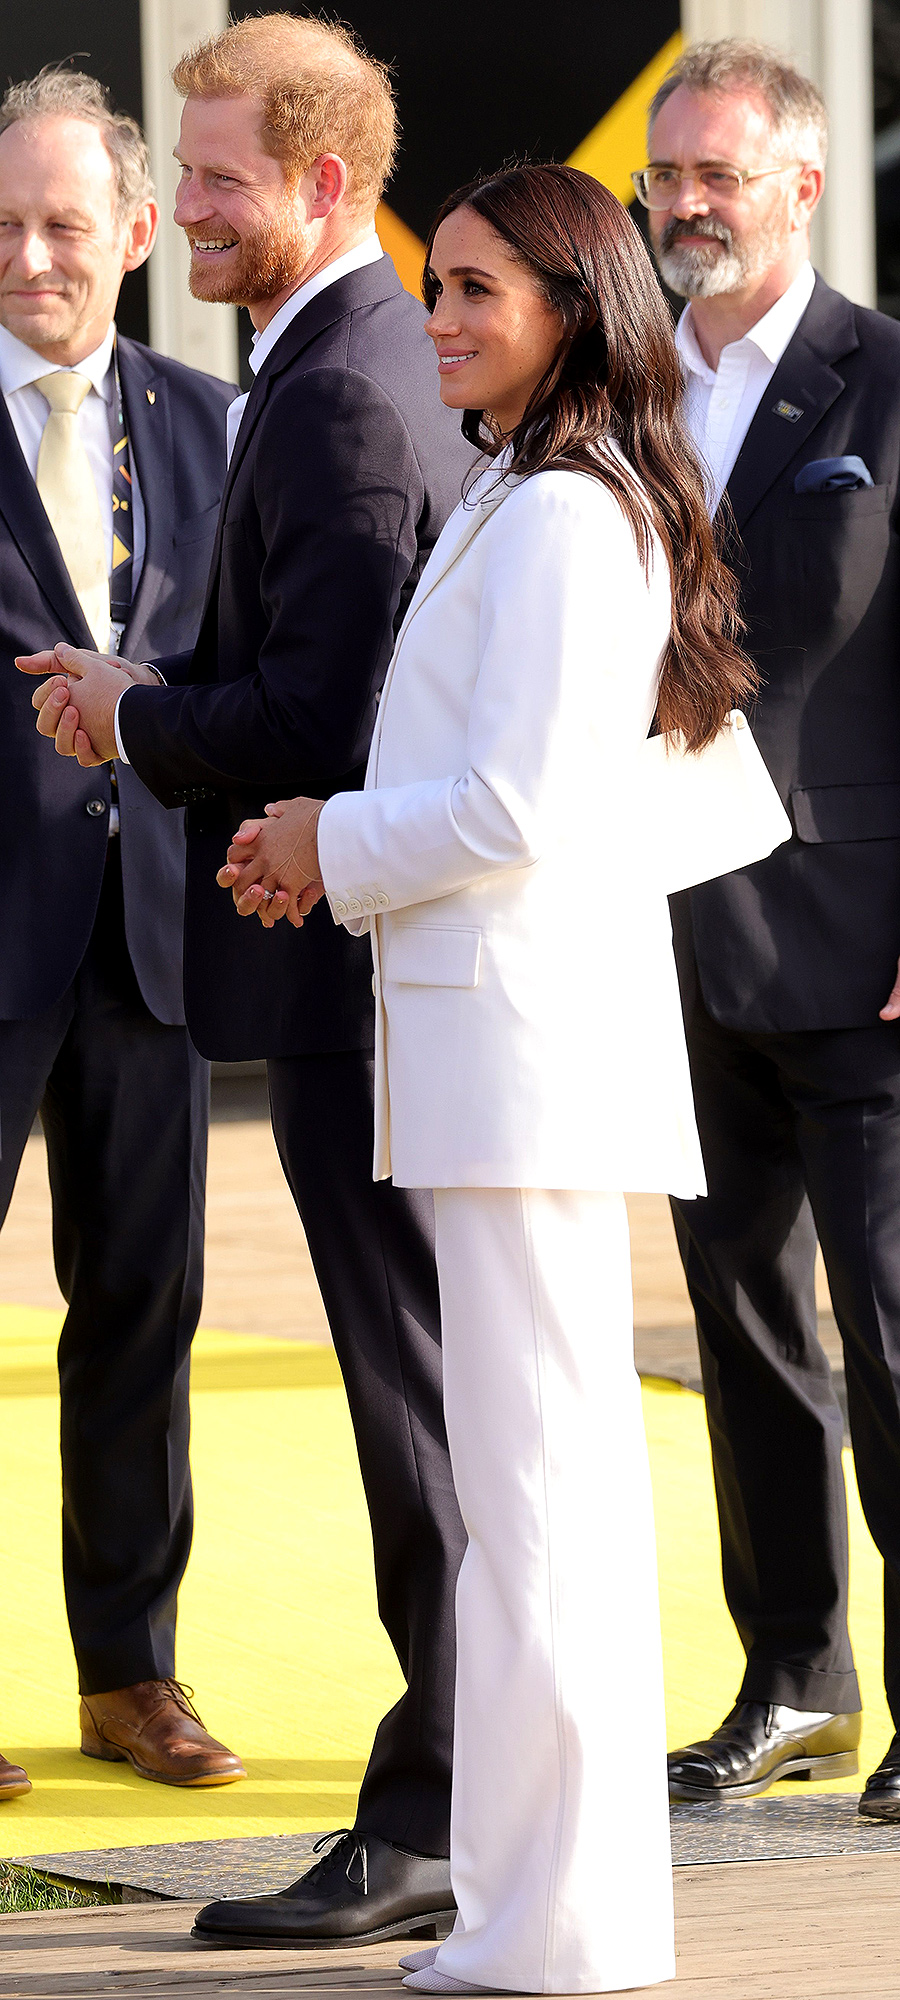 Meghan Markle turns heads in all-white look at Invictus Games: See